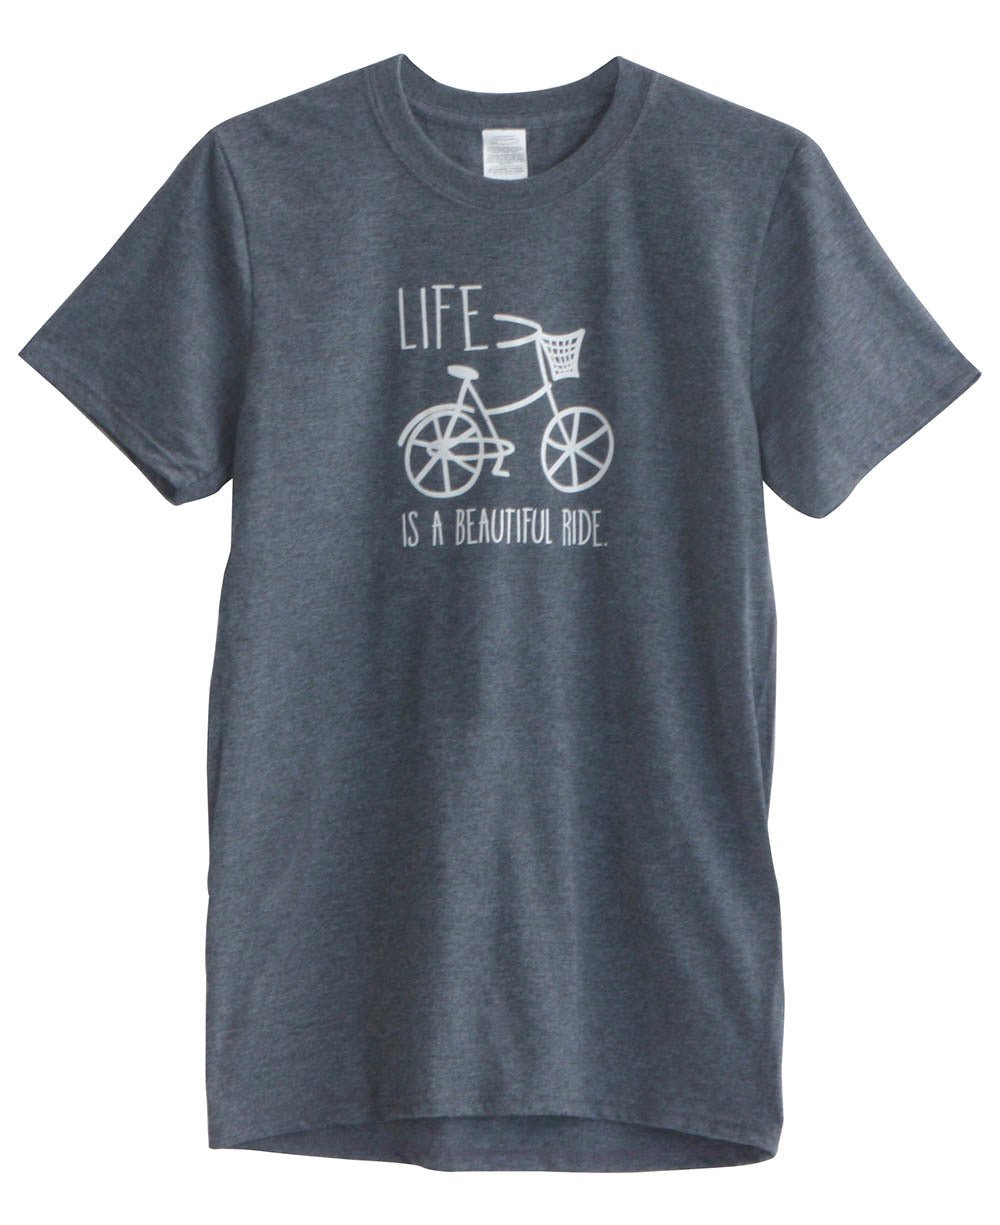 Life is a Beautiful Ride Women’s Bicycle Tee - Inspirational Apparel L